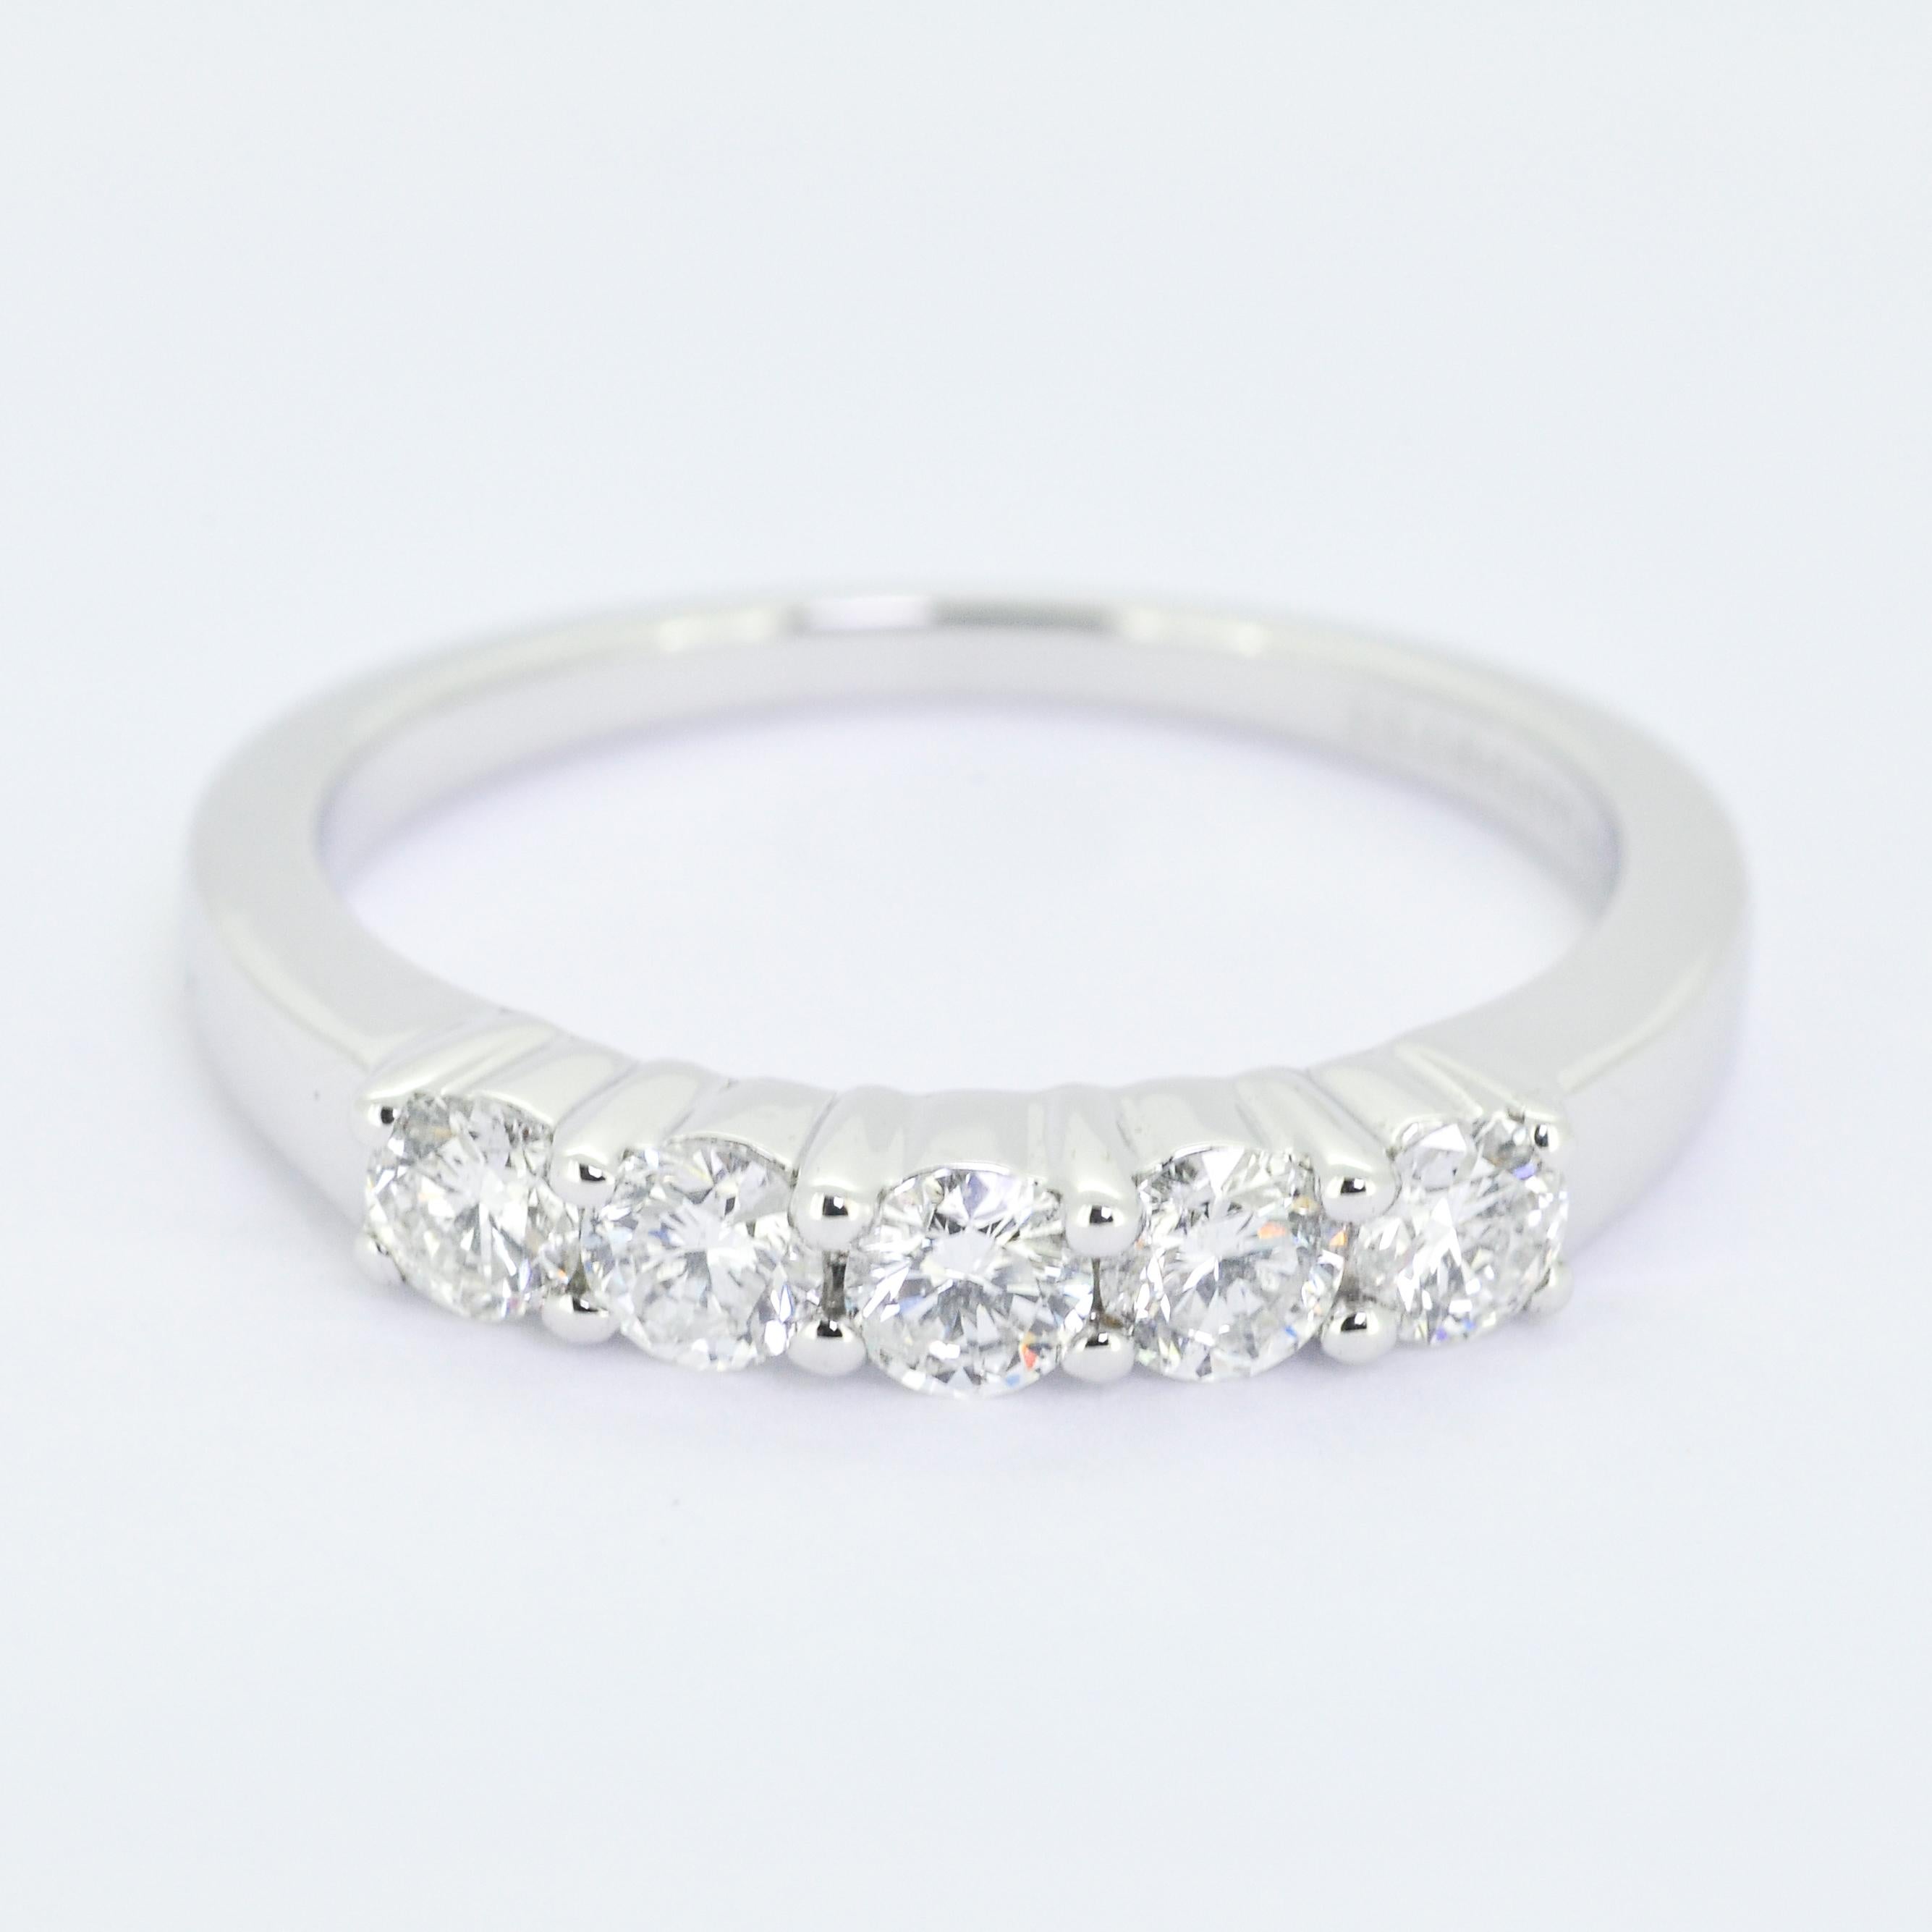 Crafted with precision and passion, this stunning piece features five brilliant diamonds, totaling 0.51 carats, set in an 18-karat white gold band.

The simplicity of the design enhances the ring's overall allure, making it a perfect symbol of